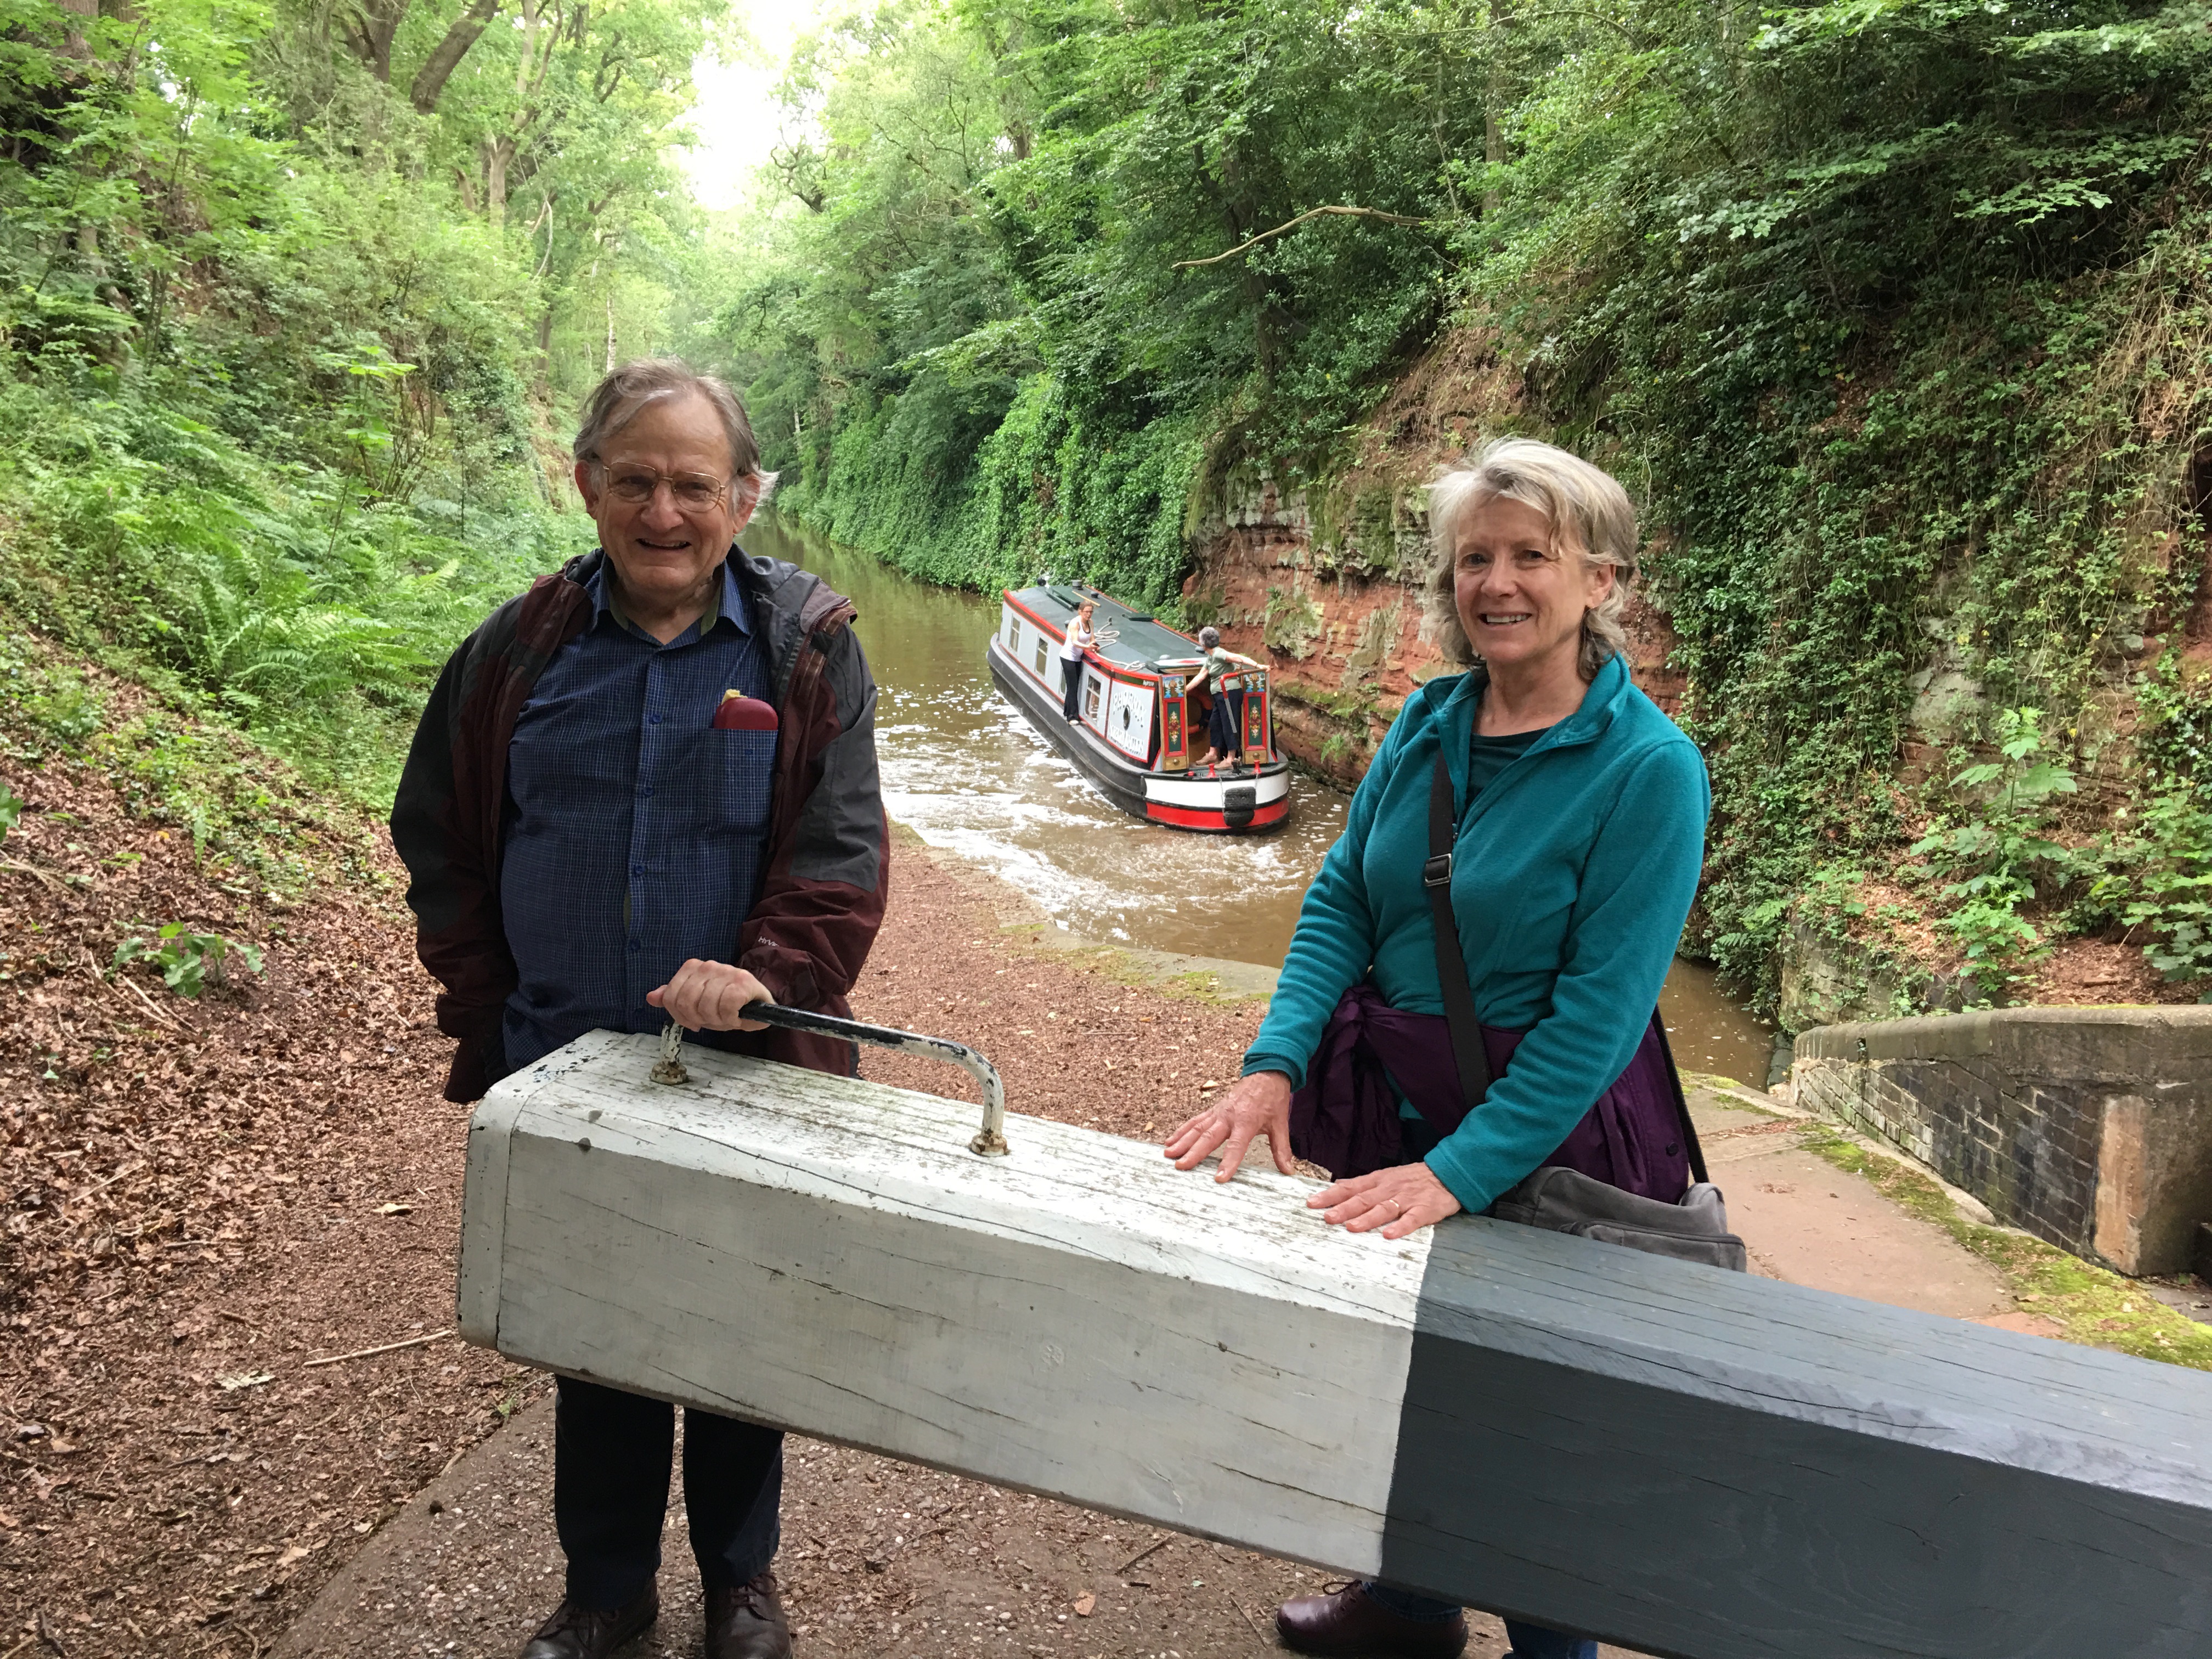 Hugh Torrens and Shirley Torrens at a canal near their home in Staffordshire, England